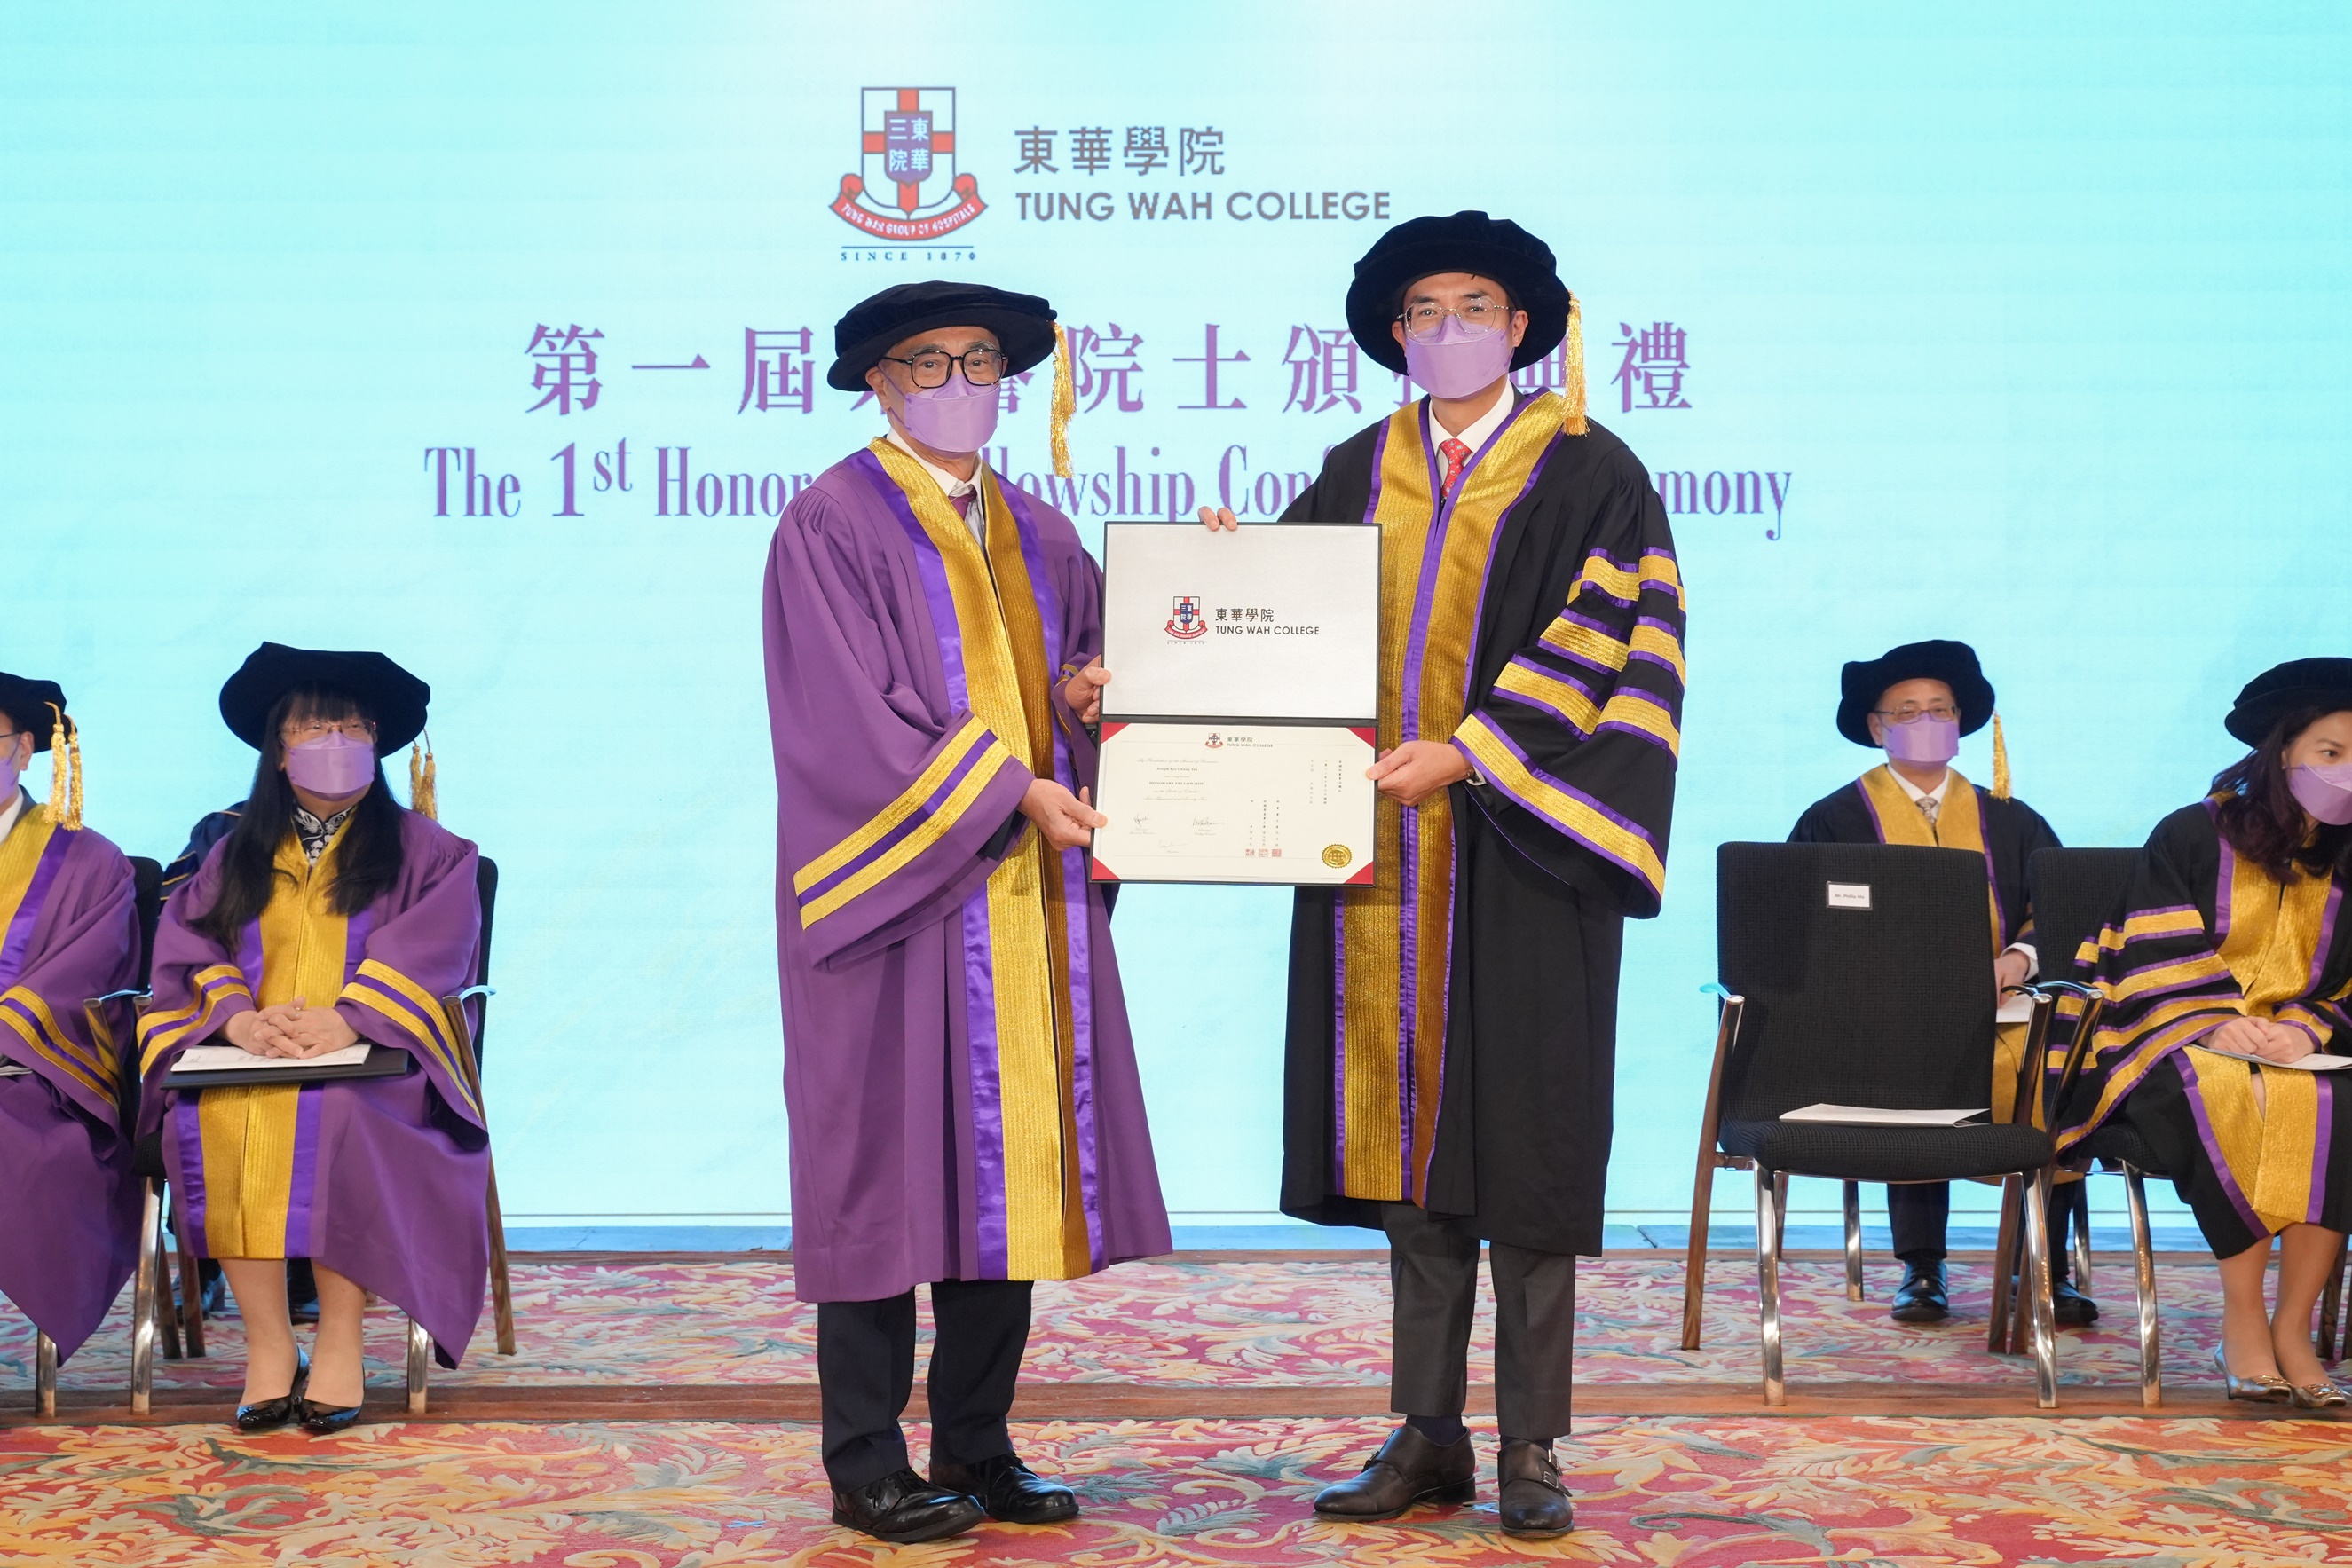 Dr. Joseph Lee Chung Tak (left) is conferred the Honorary Fellowship.